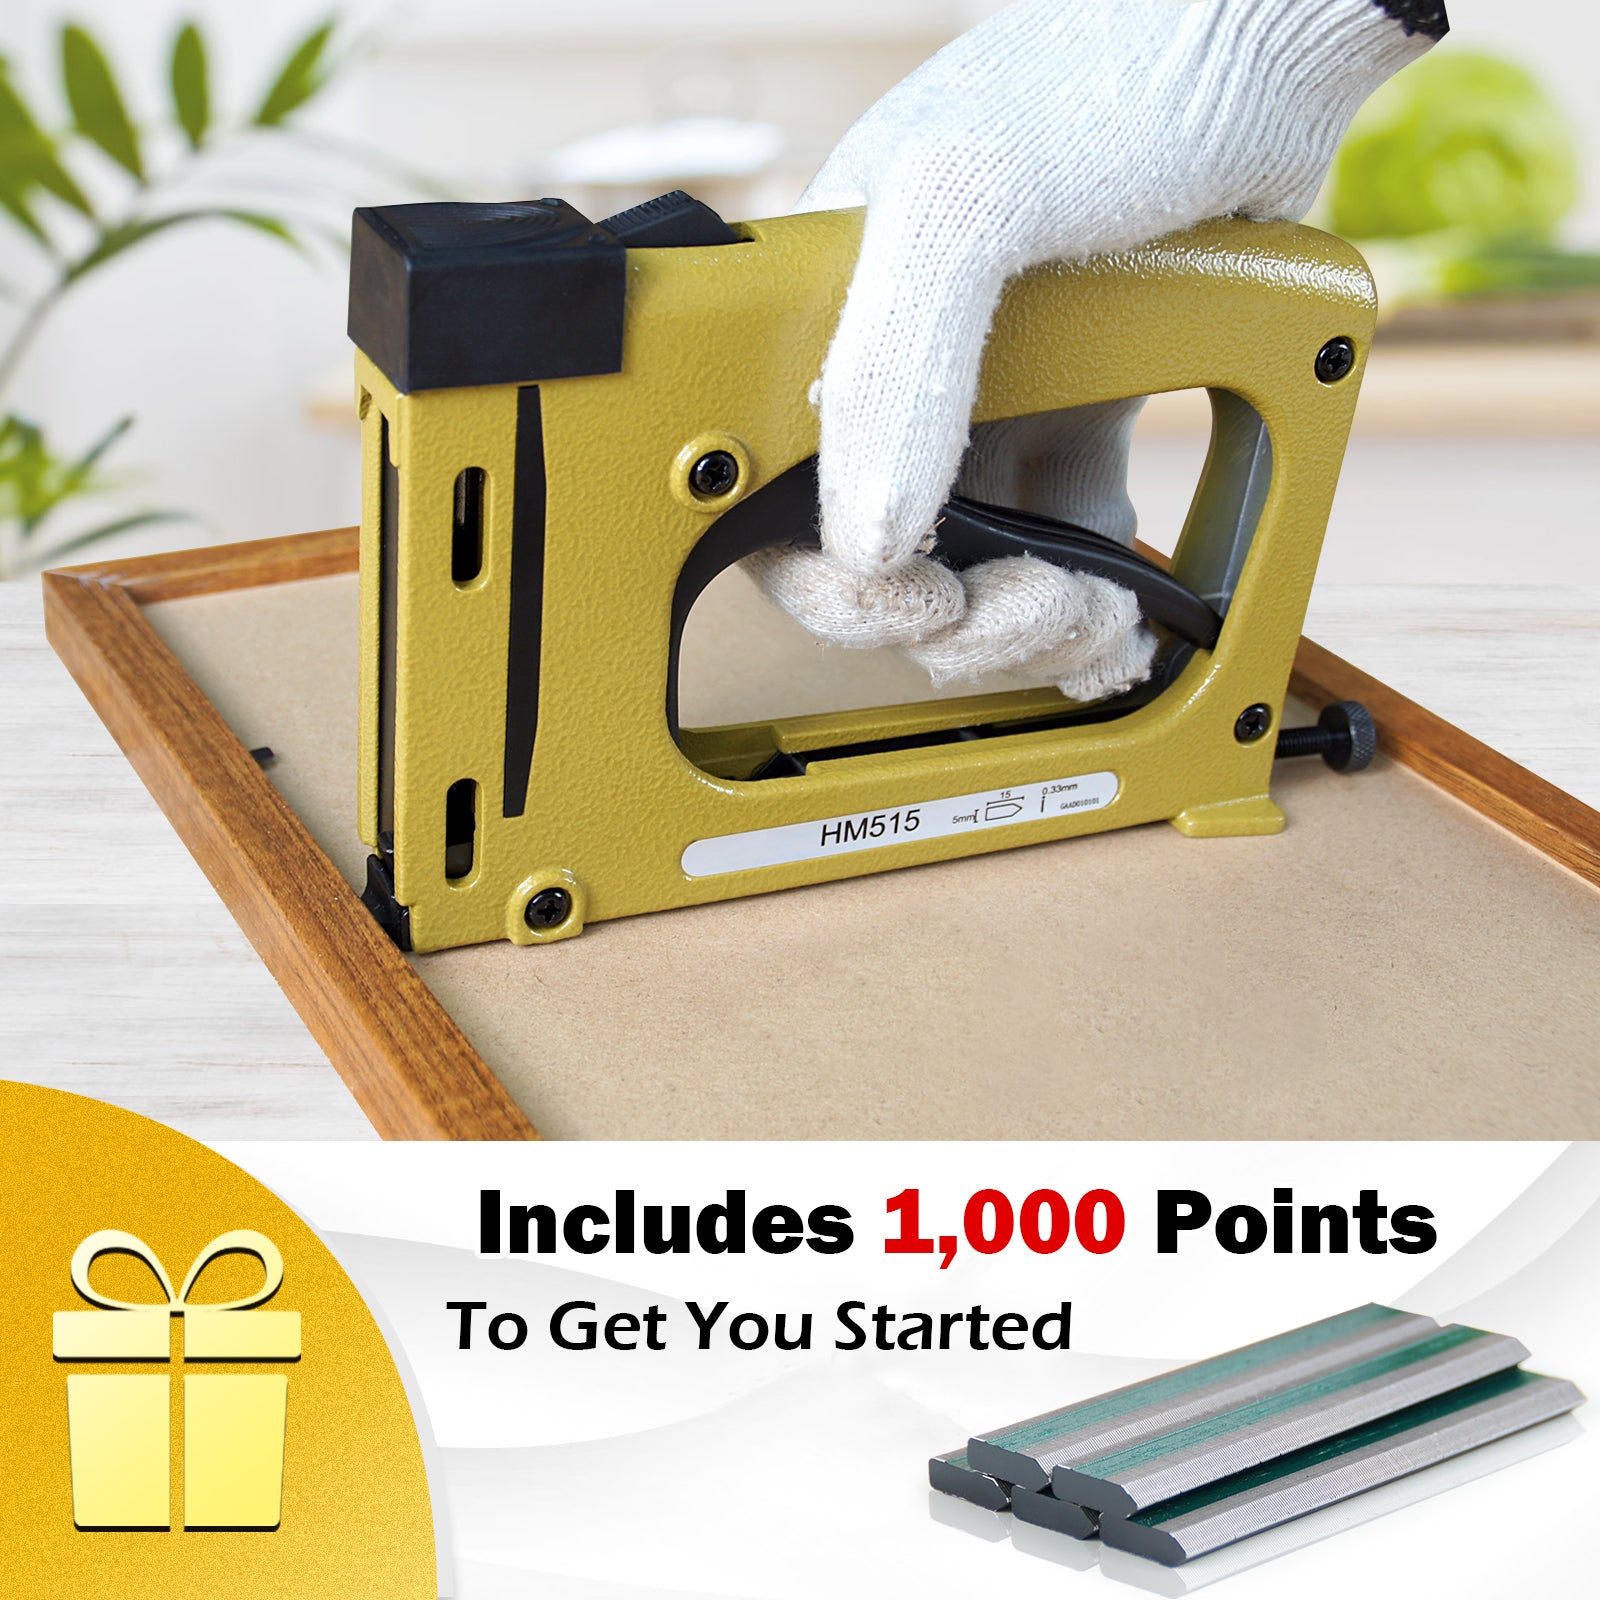 HM515 Manual Flexible Point Driver Kit with 1,000 Points for Securing Back Pieces of Picture Frames